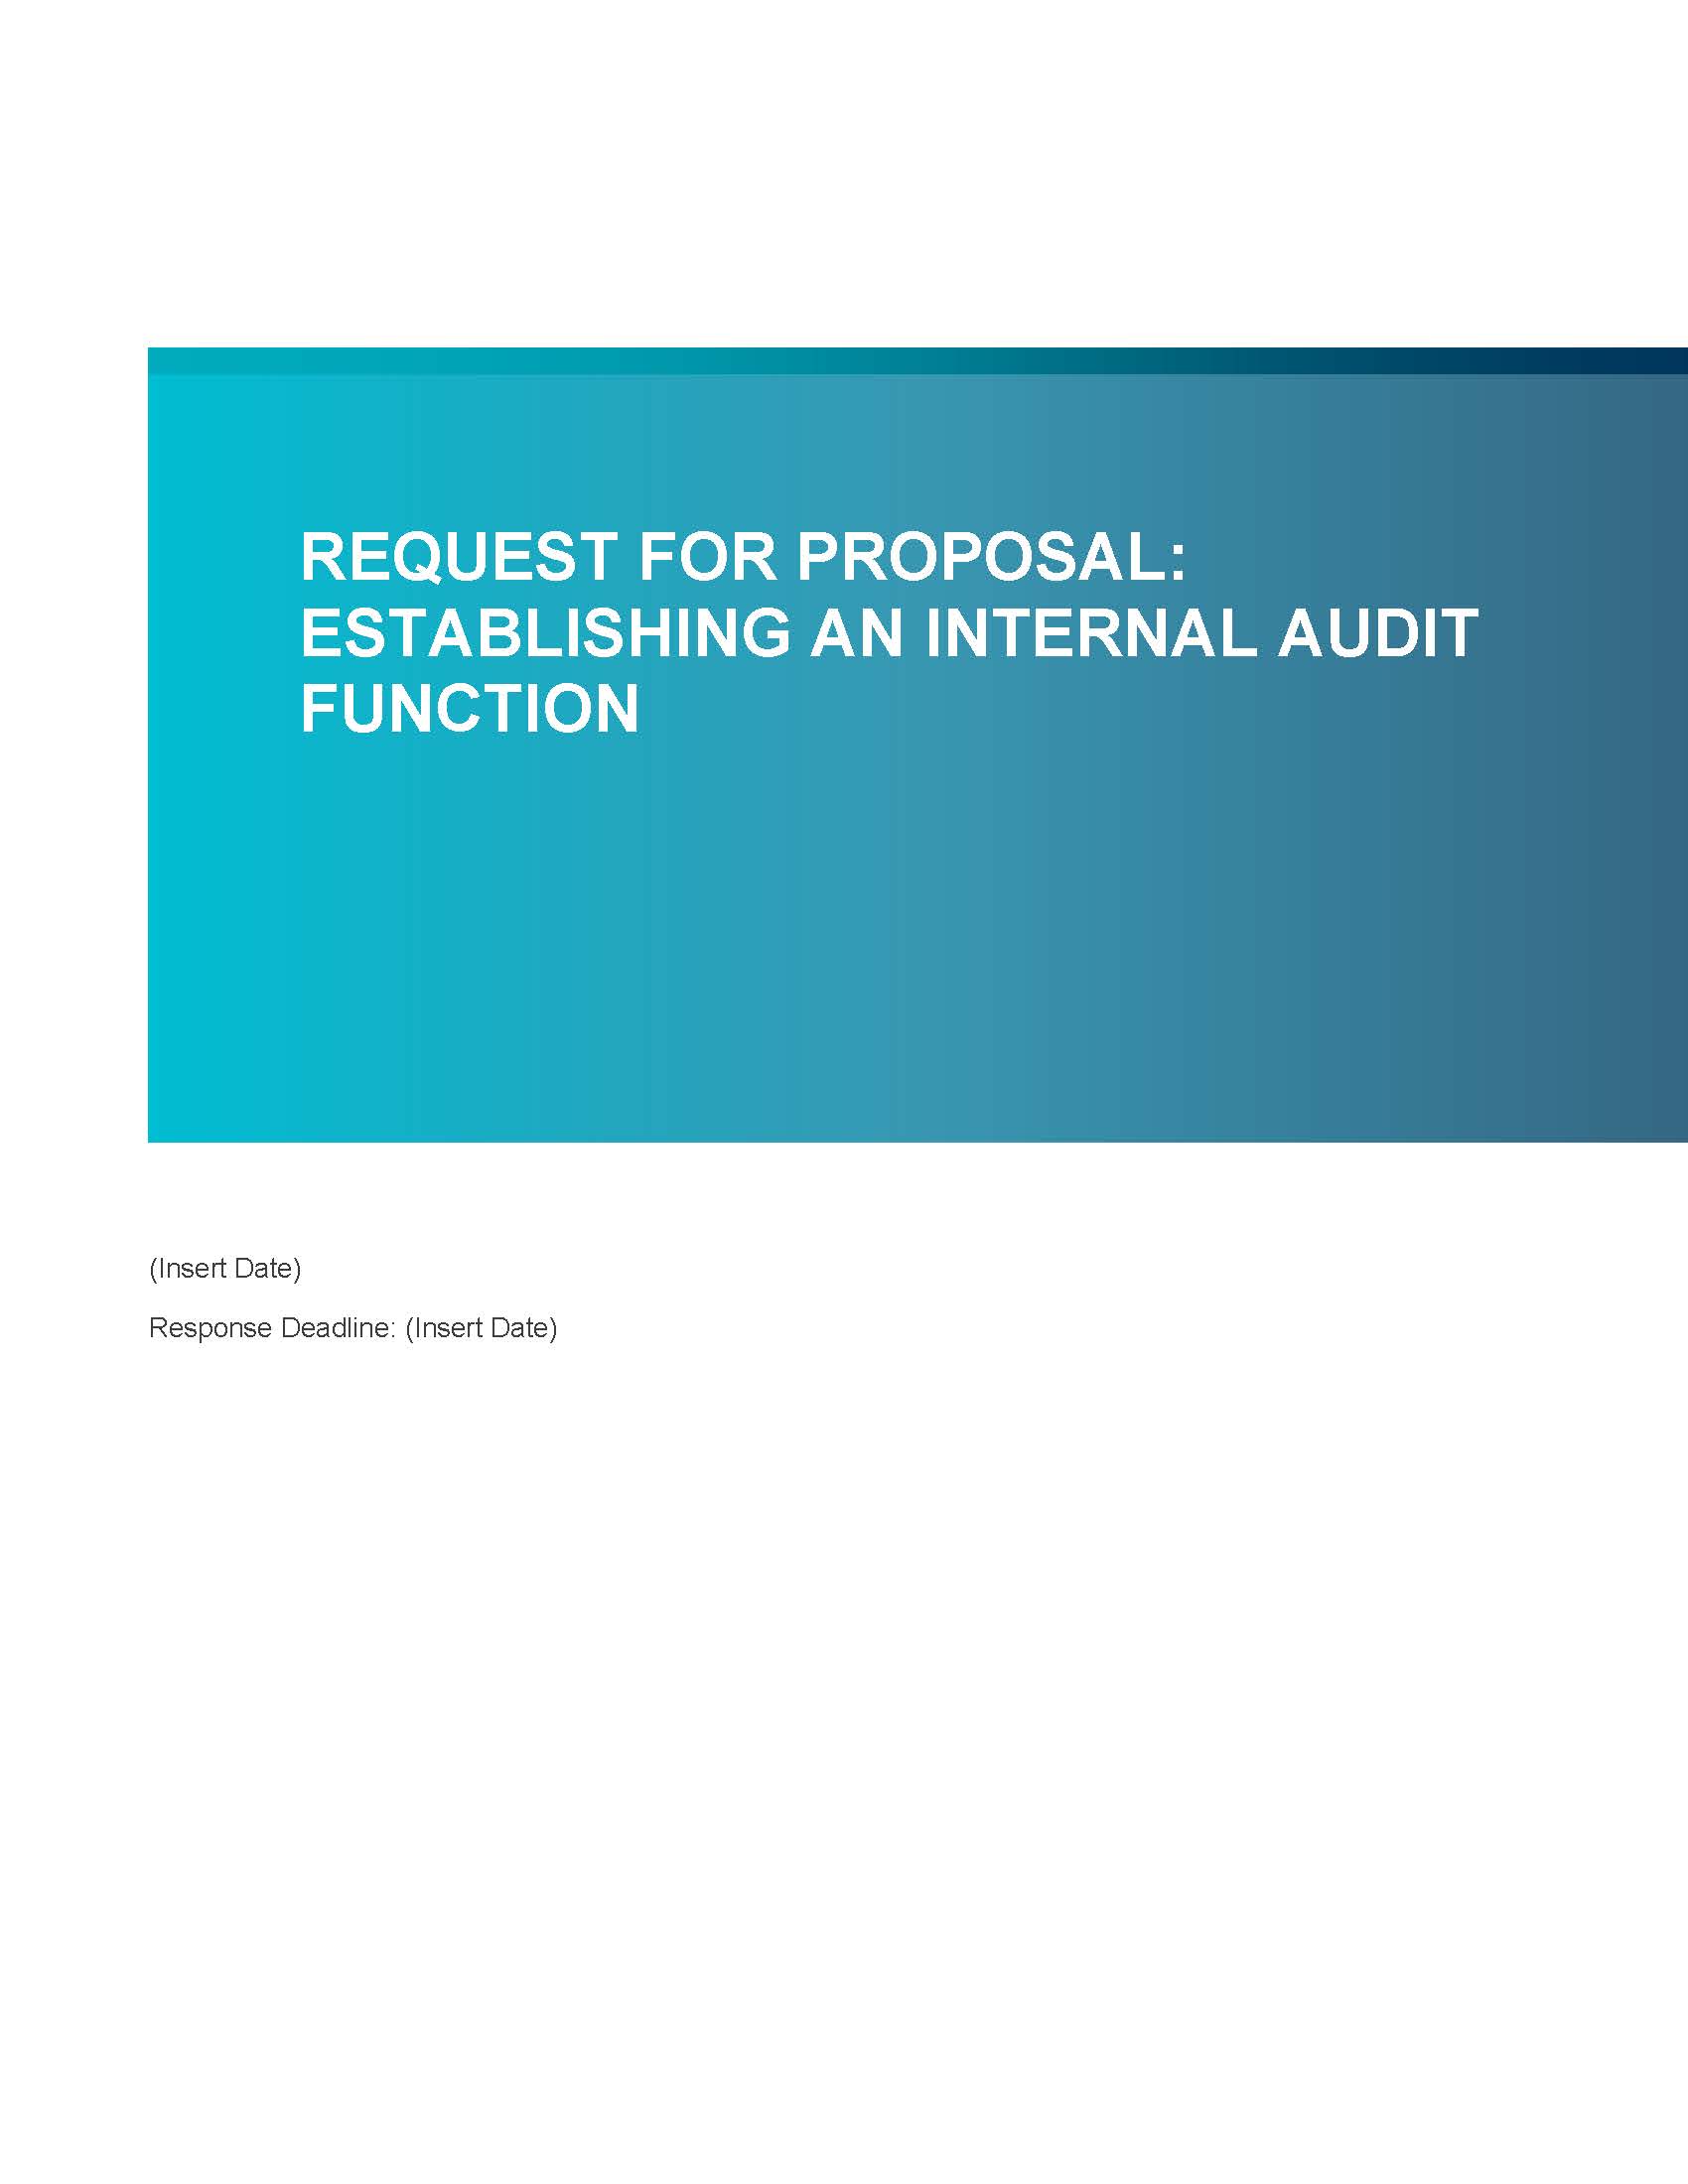 Screenshot of the first page of Request for Proposal Establishing an Internal Audit Function